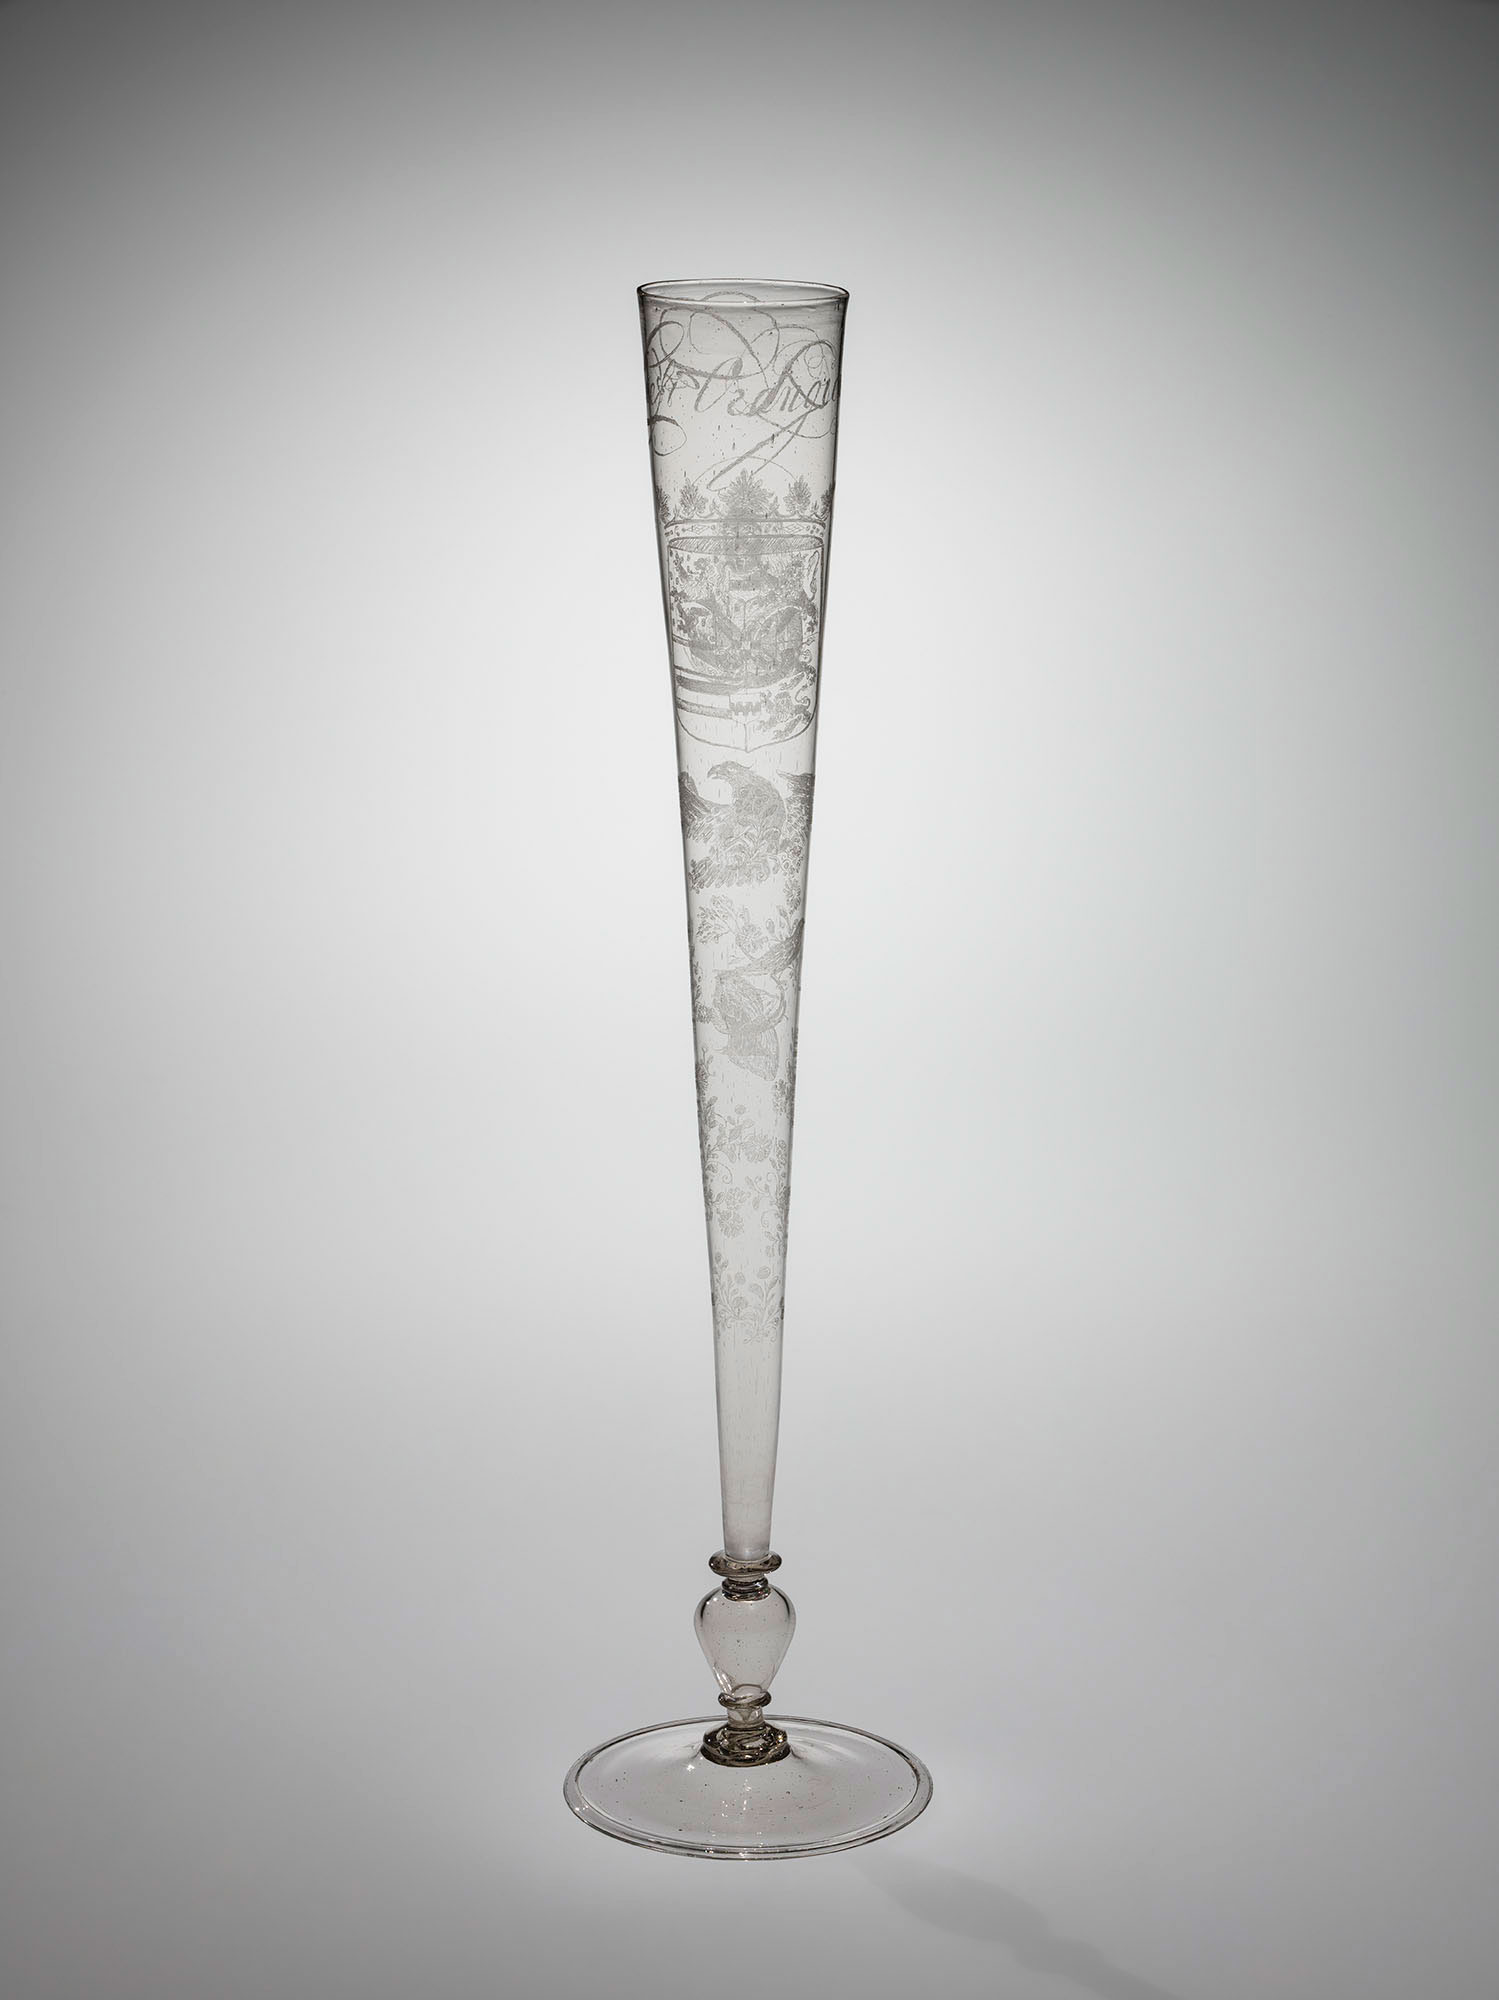 Tall, thin, clear glass flute engraved with a portrait of the William III, prince of Orange